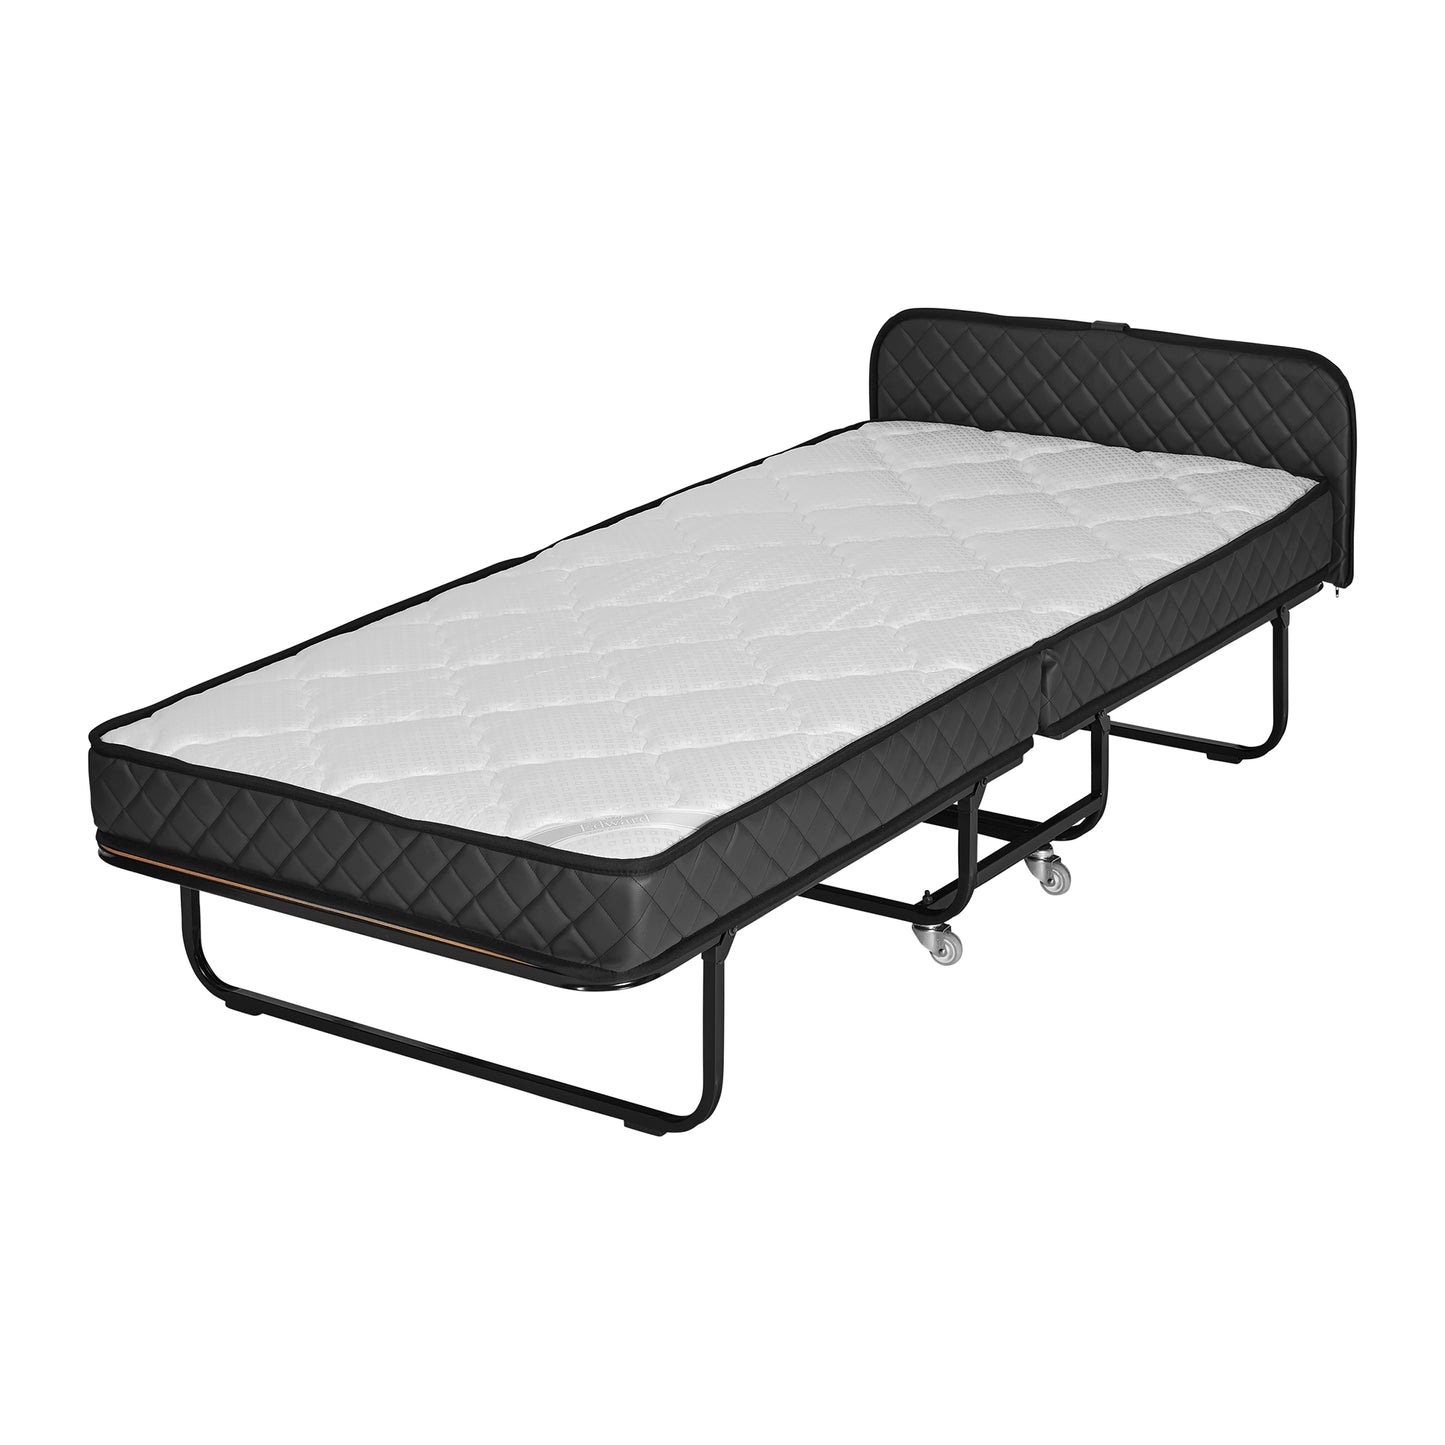 FREE PICK UP Miami - Edward - Rollaway folding bed Original PU leather, firm